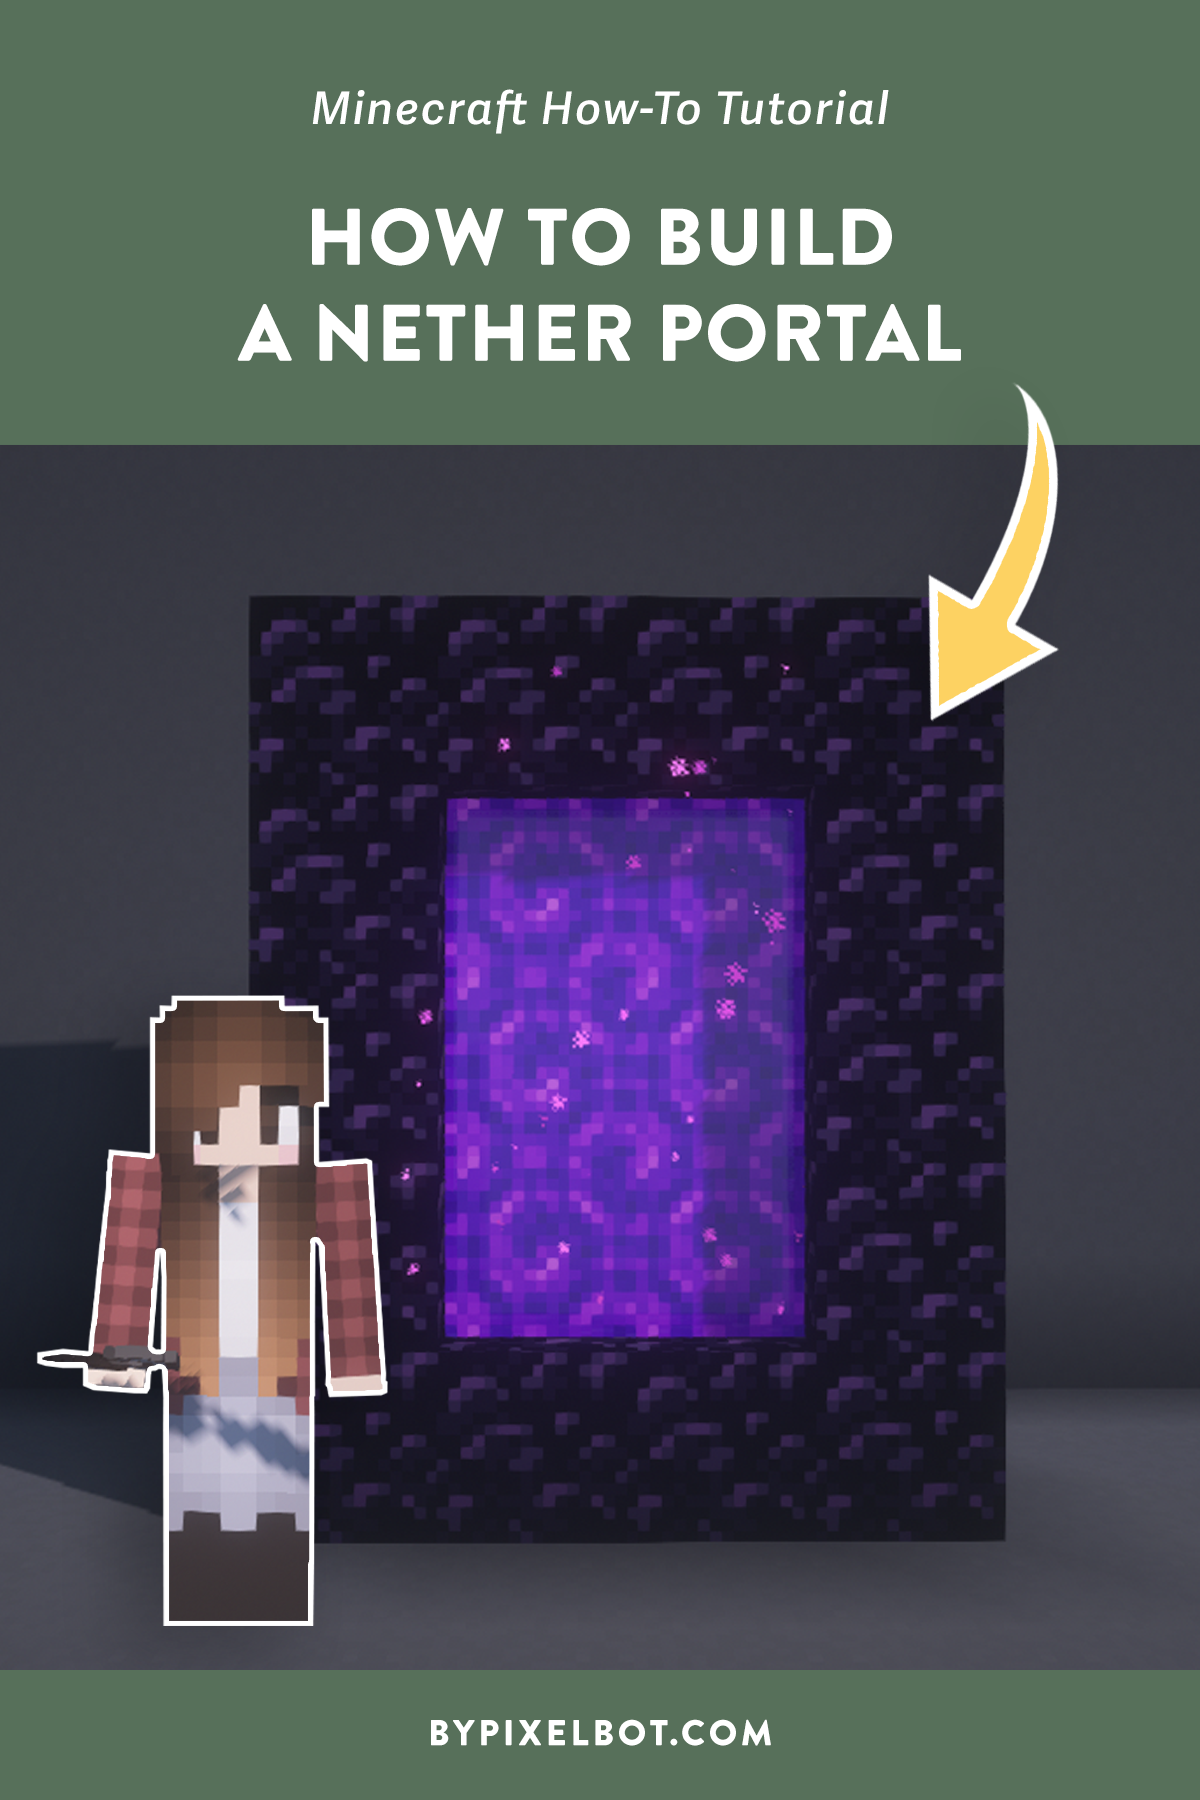 How to Make a Nether Portal in Minecraft (with Pictures) - wikiHow